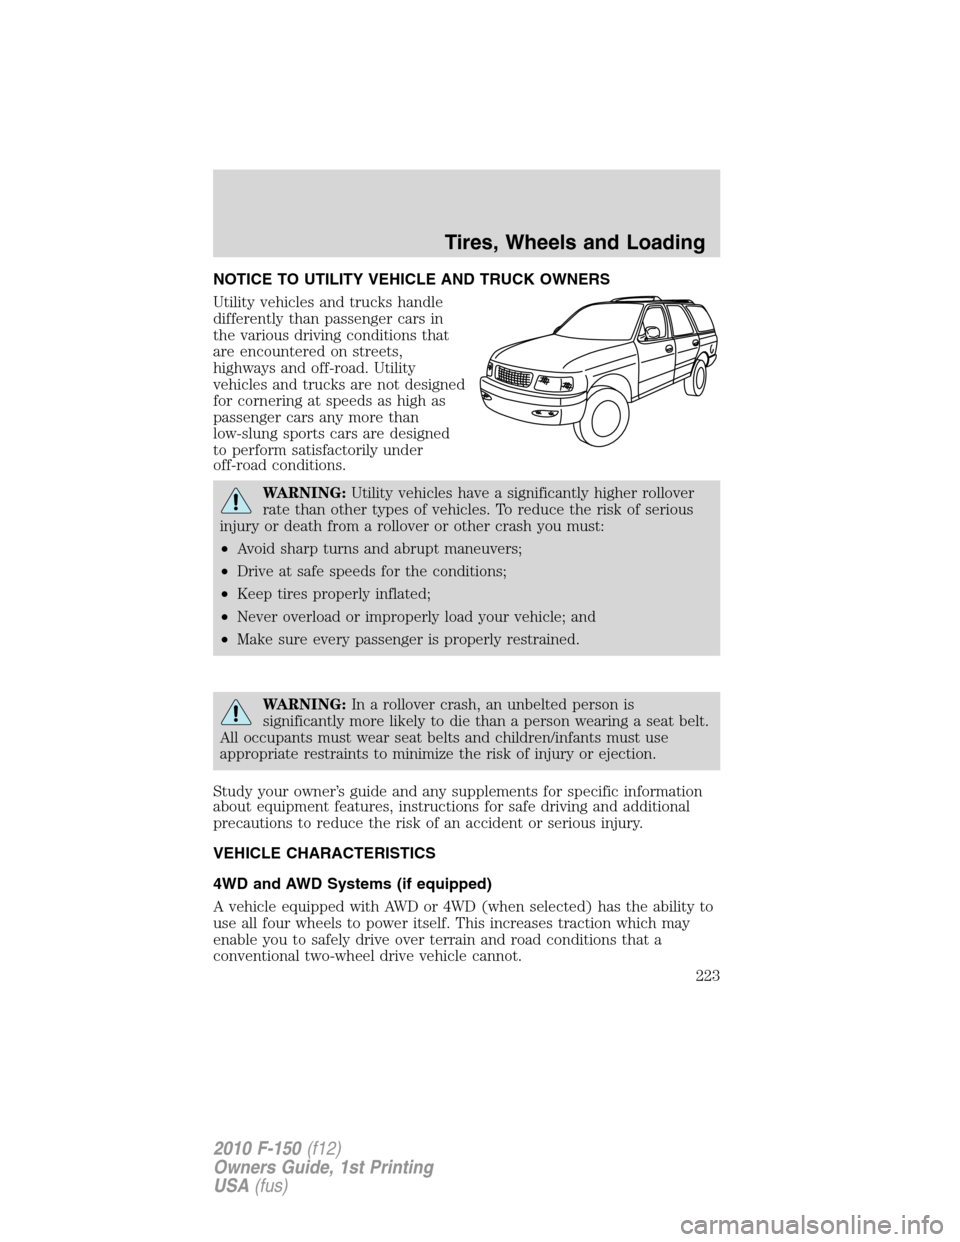 FORD F150 2010 12.G Owners Manual NOTICE TO UTILITY VEHICLE AND TRUCK OWNERS
Utility vehicles and trucks handle
differently than passenger cars in
the various driving conditions that
are encountered on streets,
highways and off-road. 